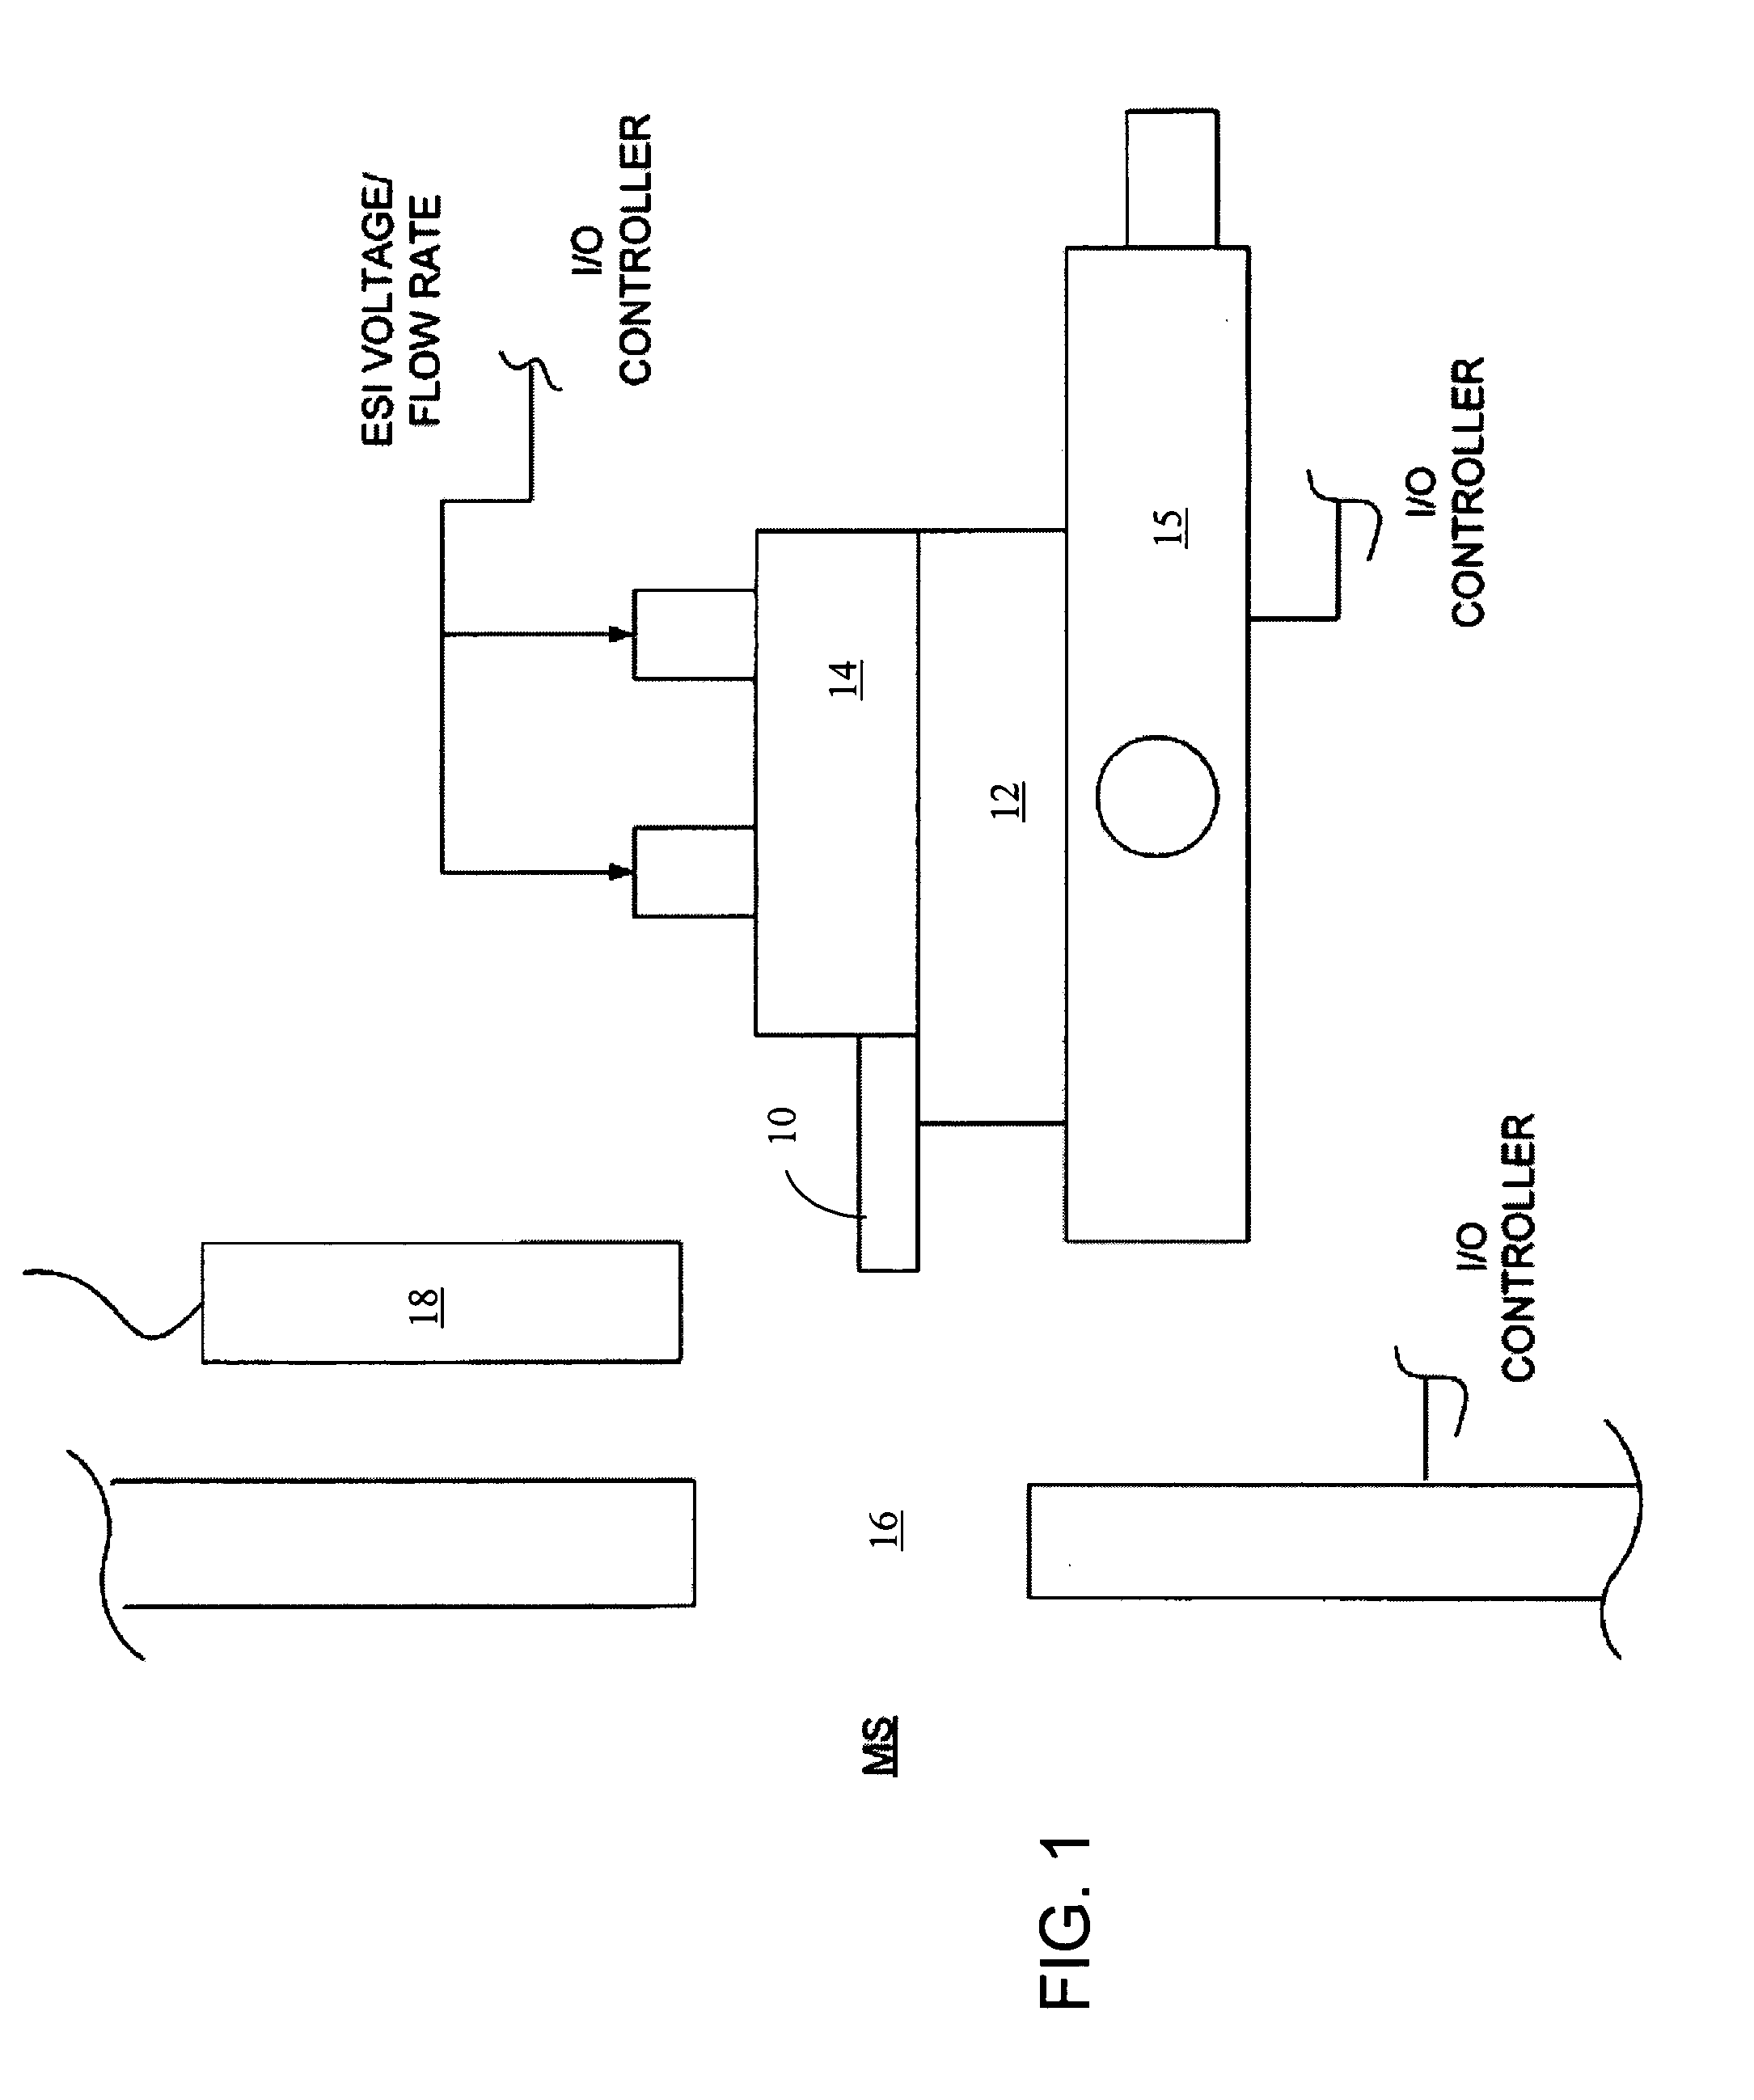 Methods and apparatus for self-optimization of electrospray ionization devices